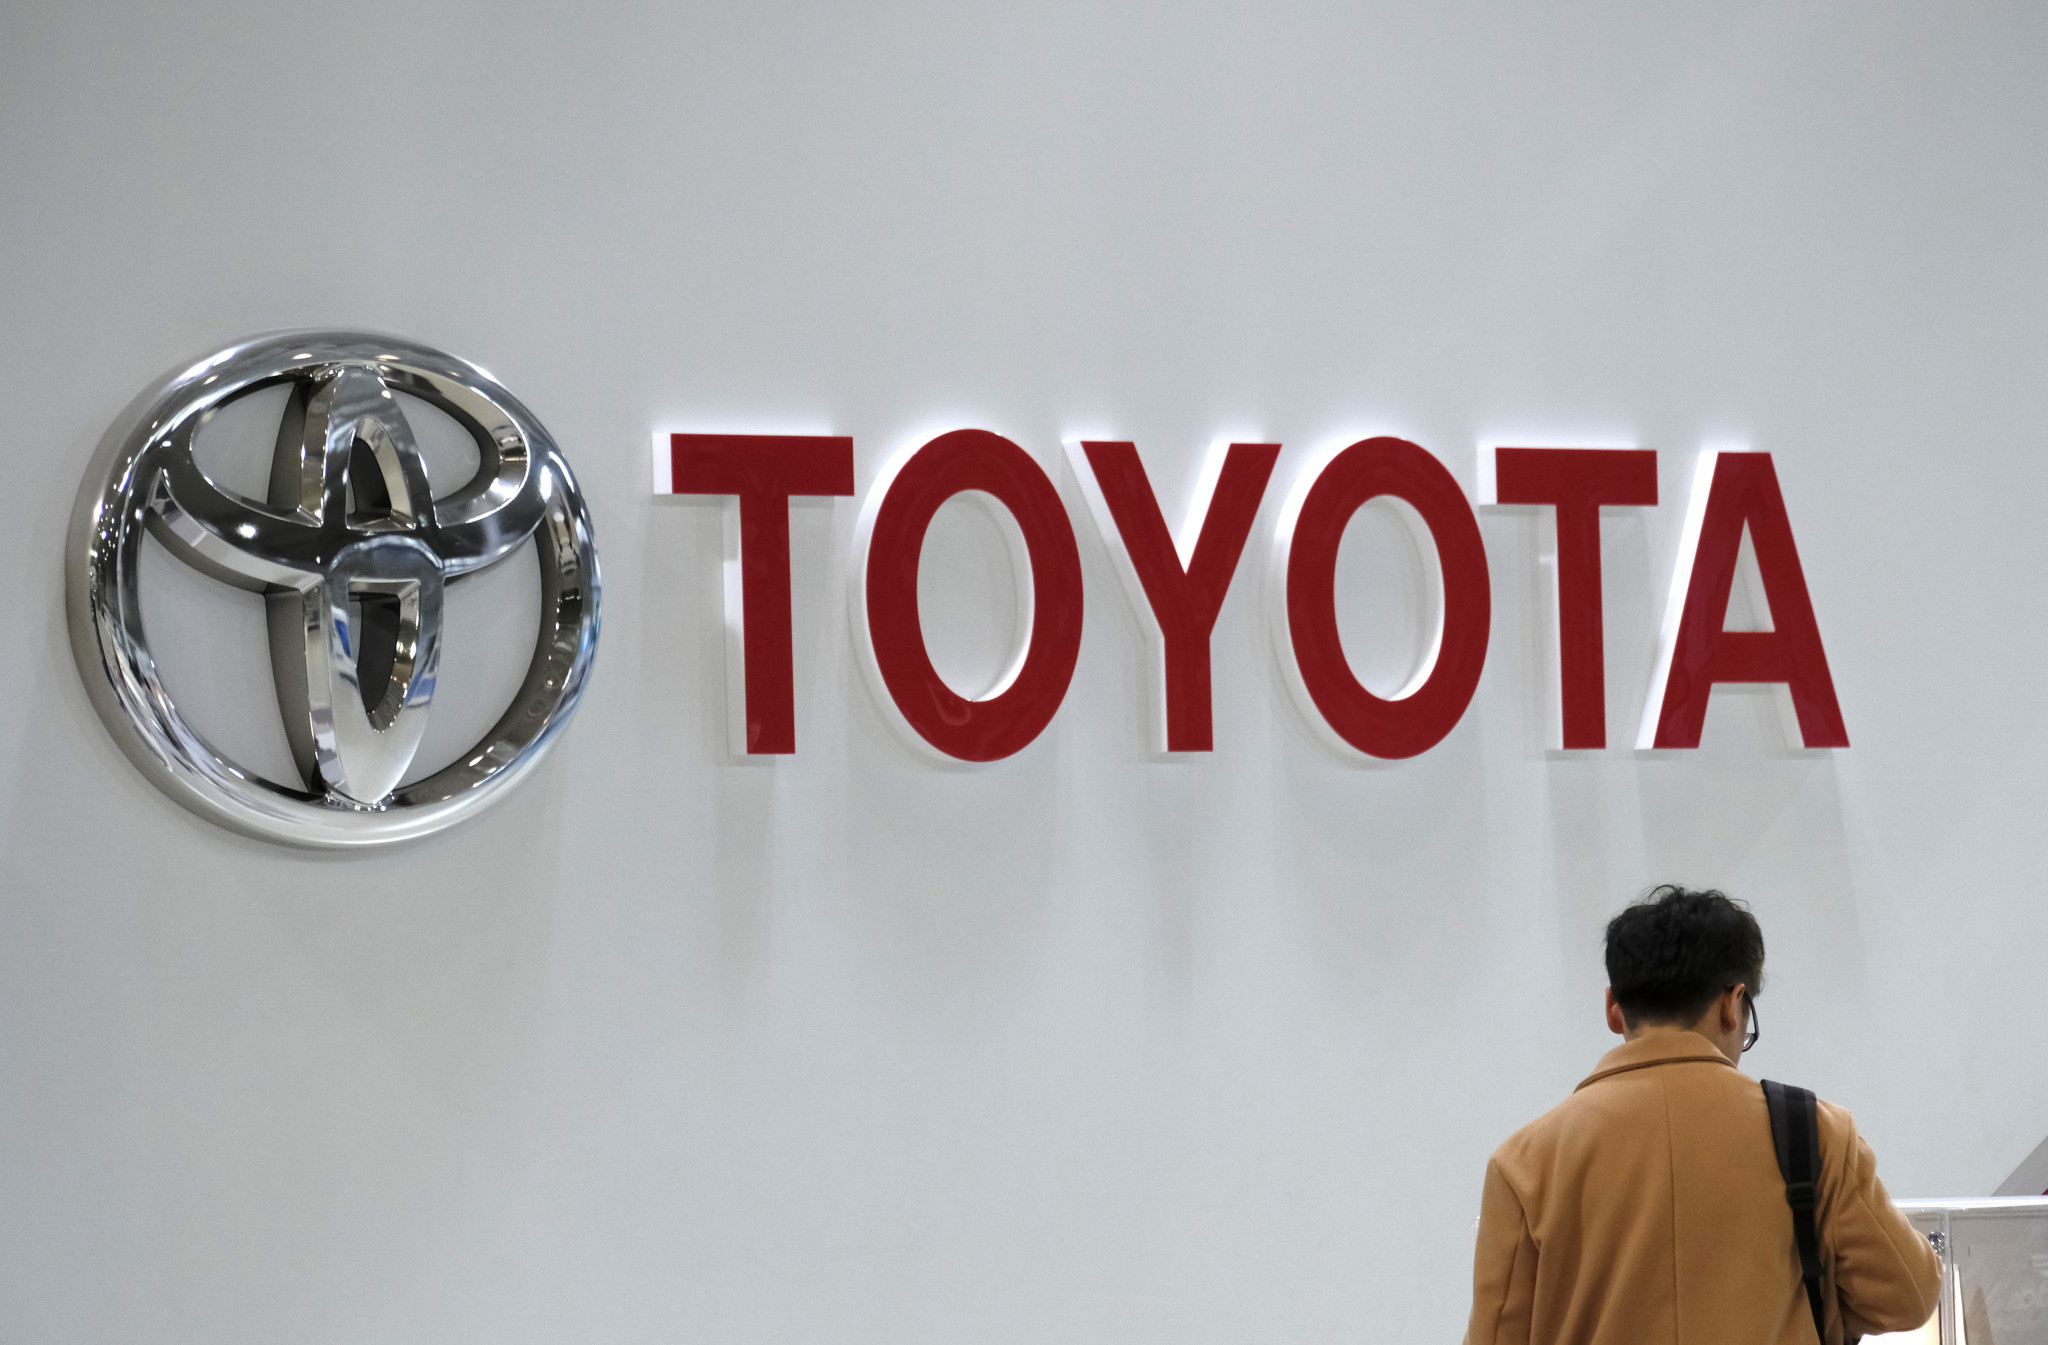 TOP sponsors like Toyota have struggled financially since the COVID-19 pandemic ©Getty Images